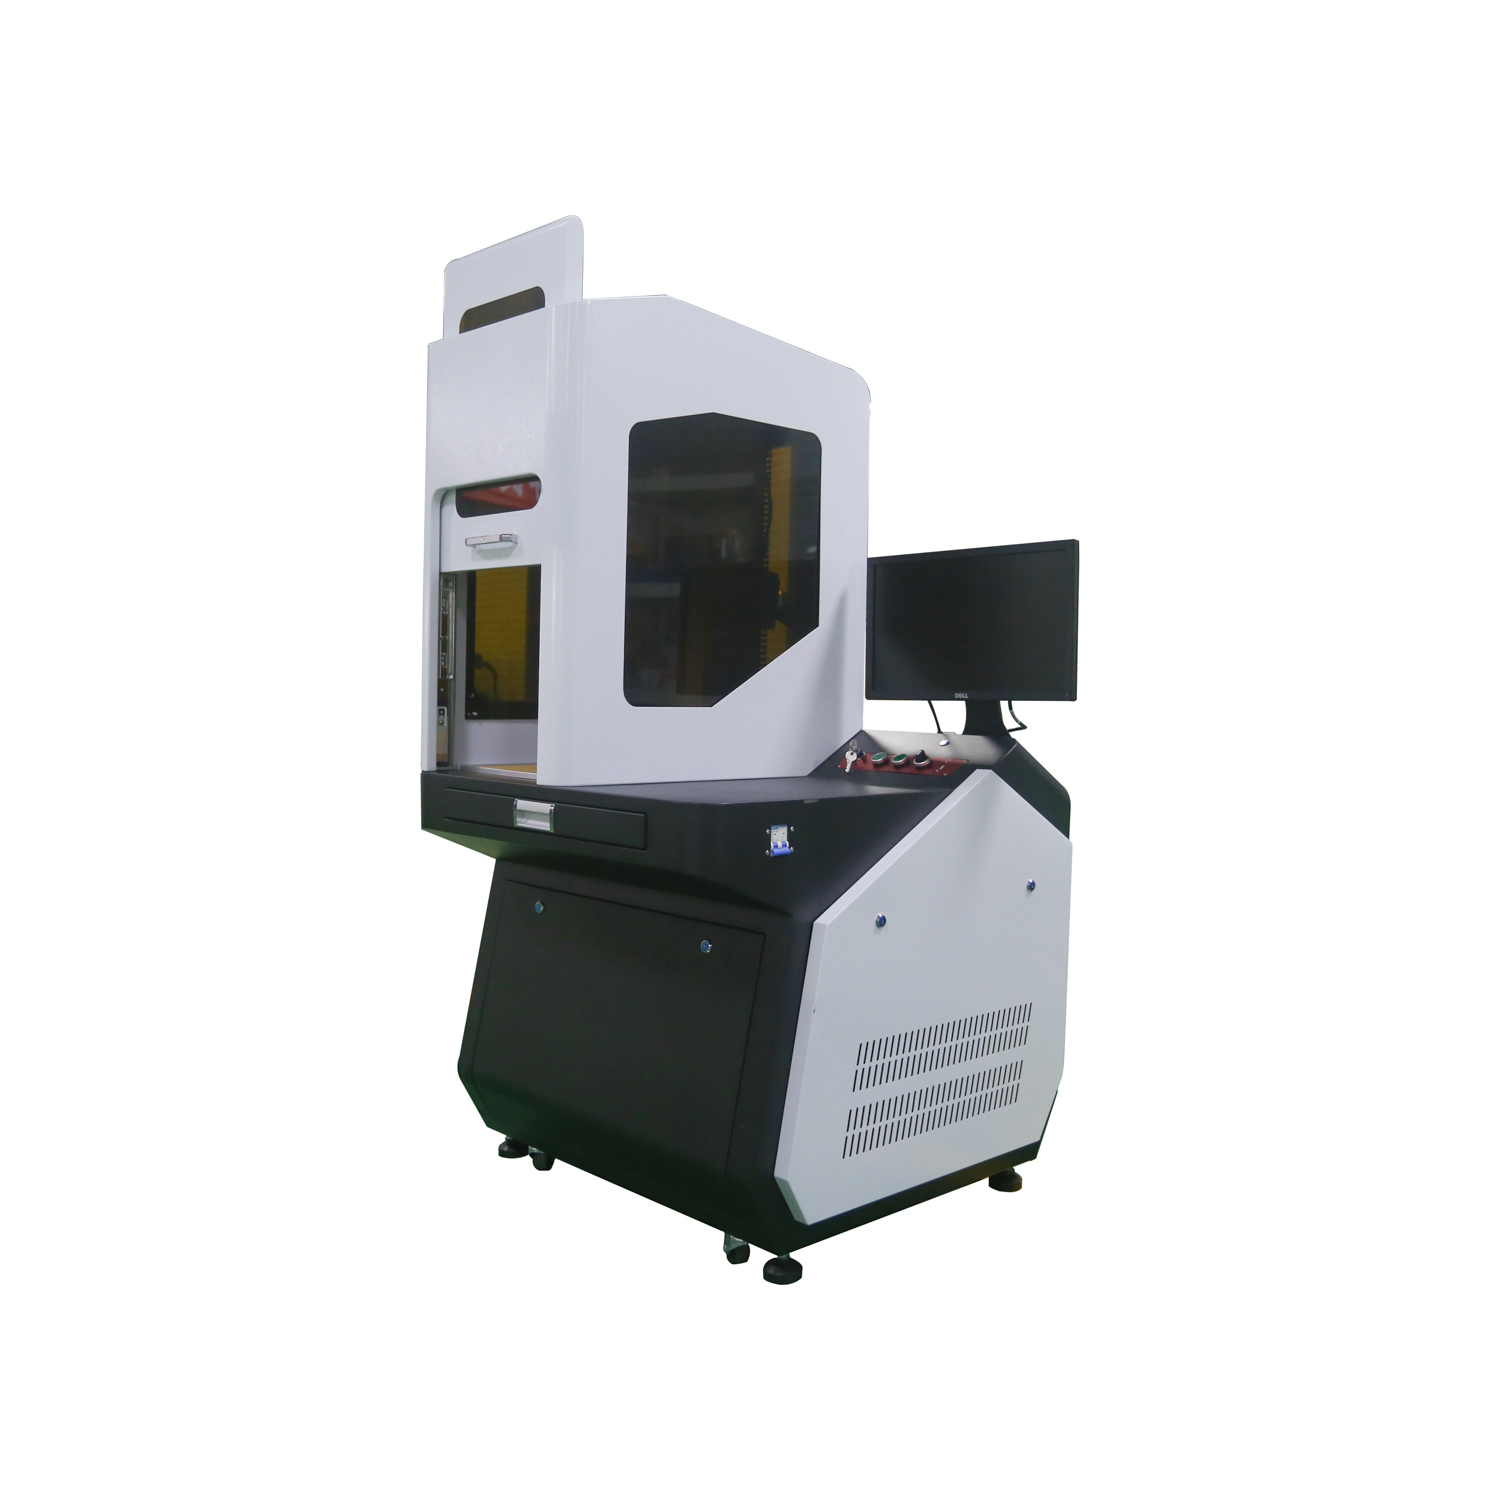 Portable Optical 20W 30W Fiber Laser Marking Machine with Raycus Laser Source Featured Image